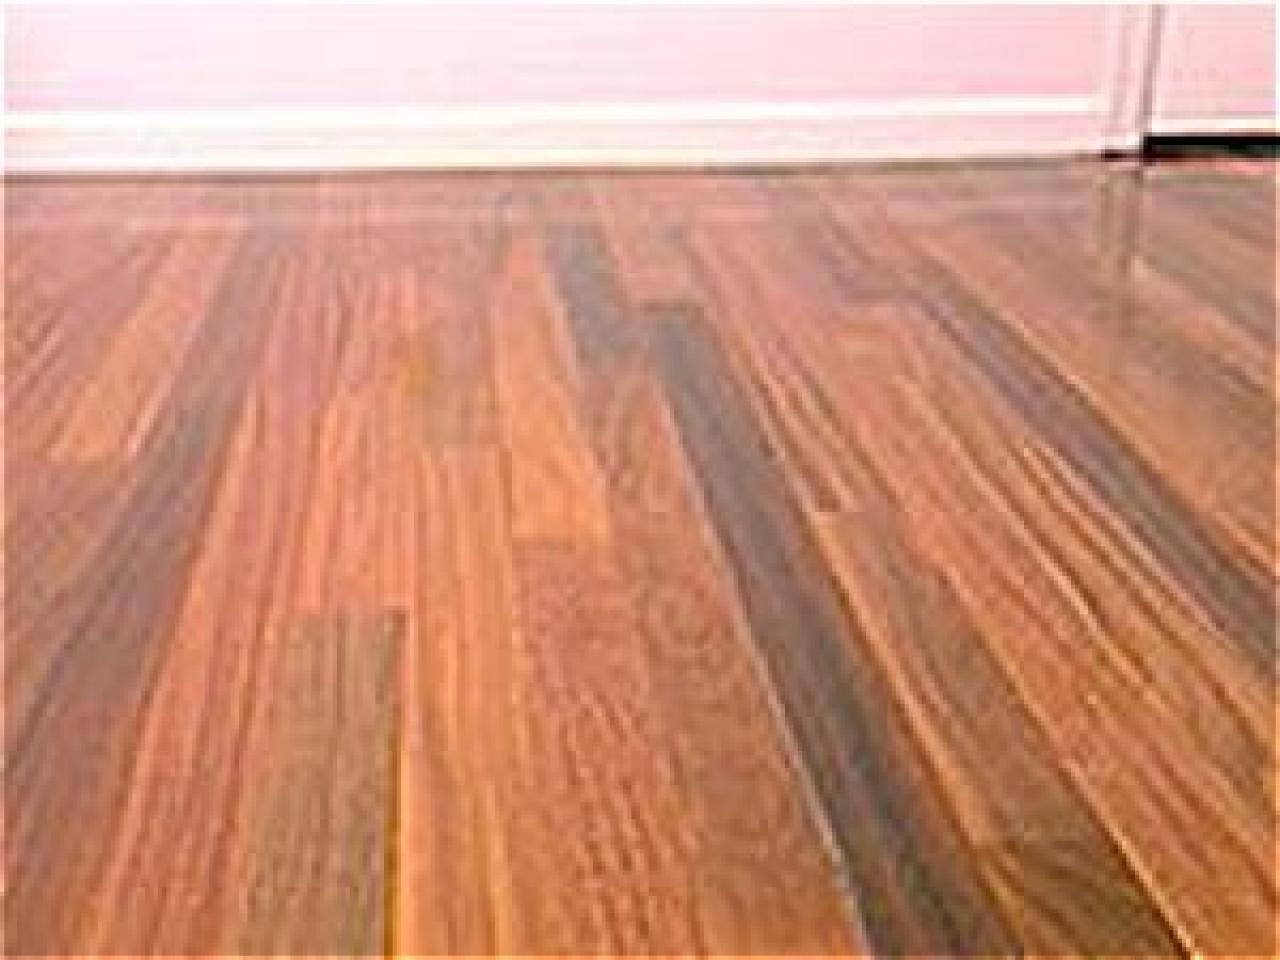 How To Install A Hardwood Floor, What Size Cleat Nails For 3 4 Hardwood Floor